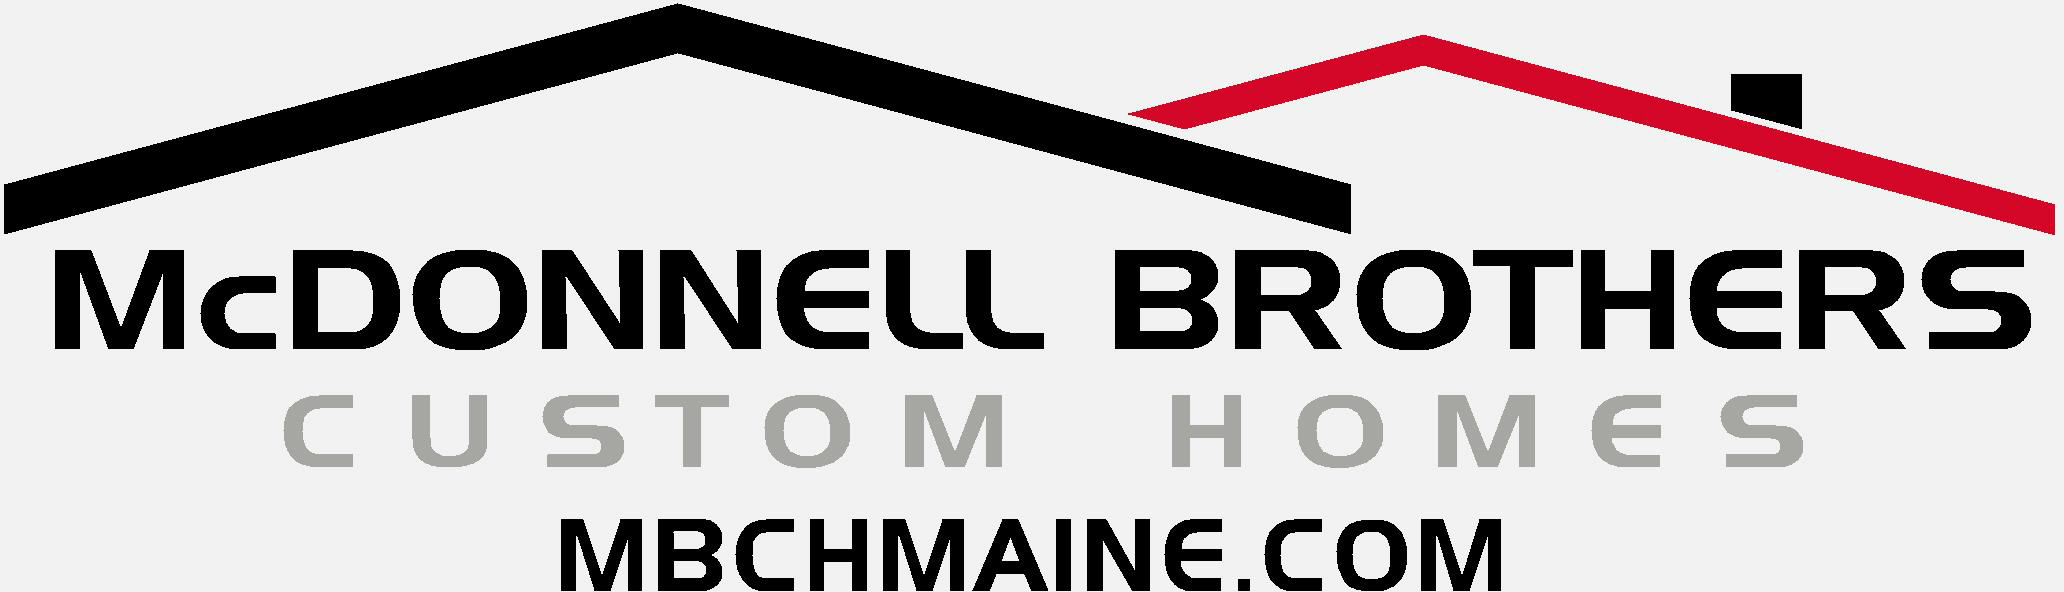 McDonnell Brothers Custom Homes